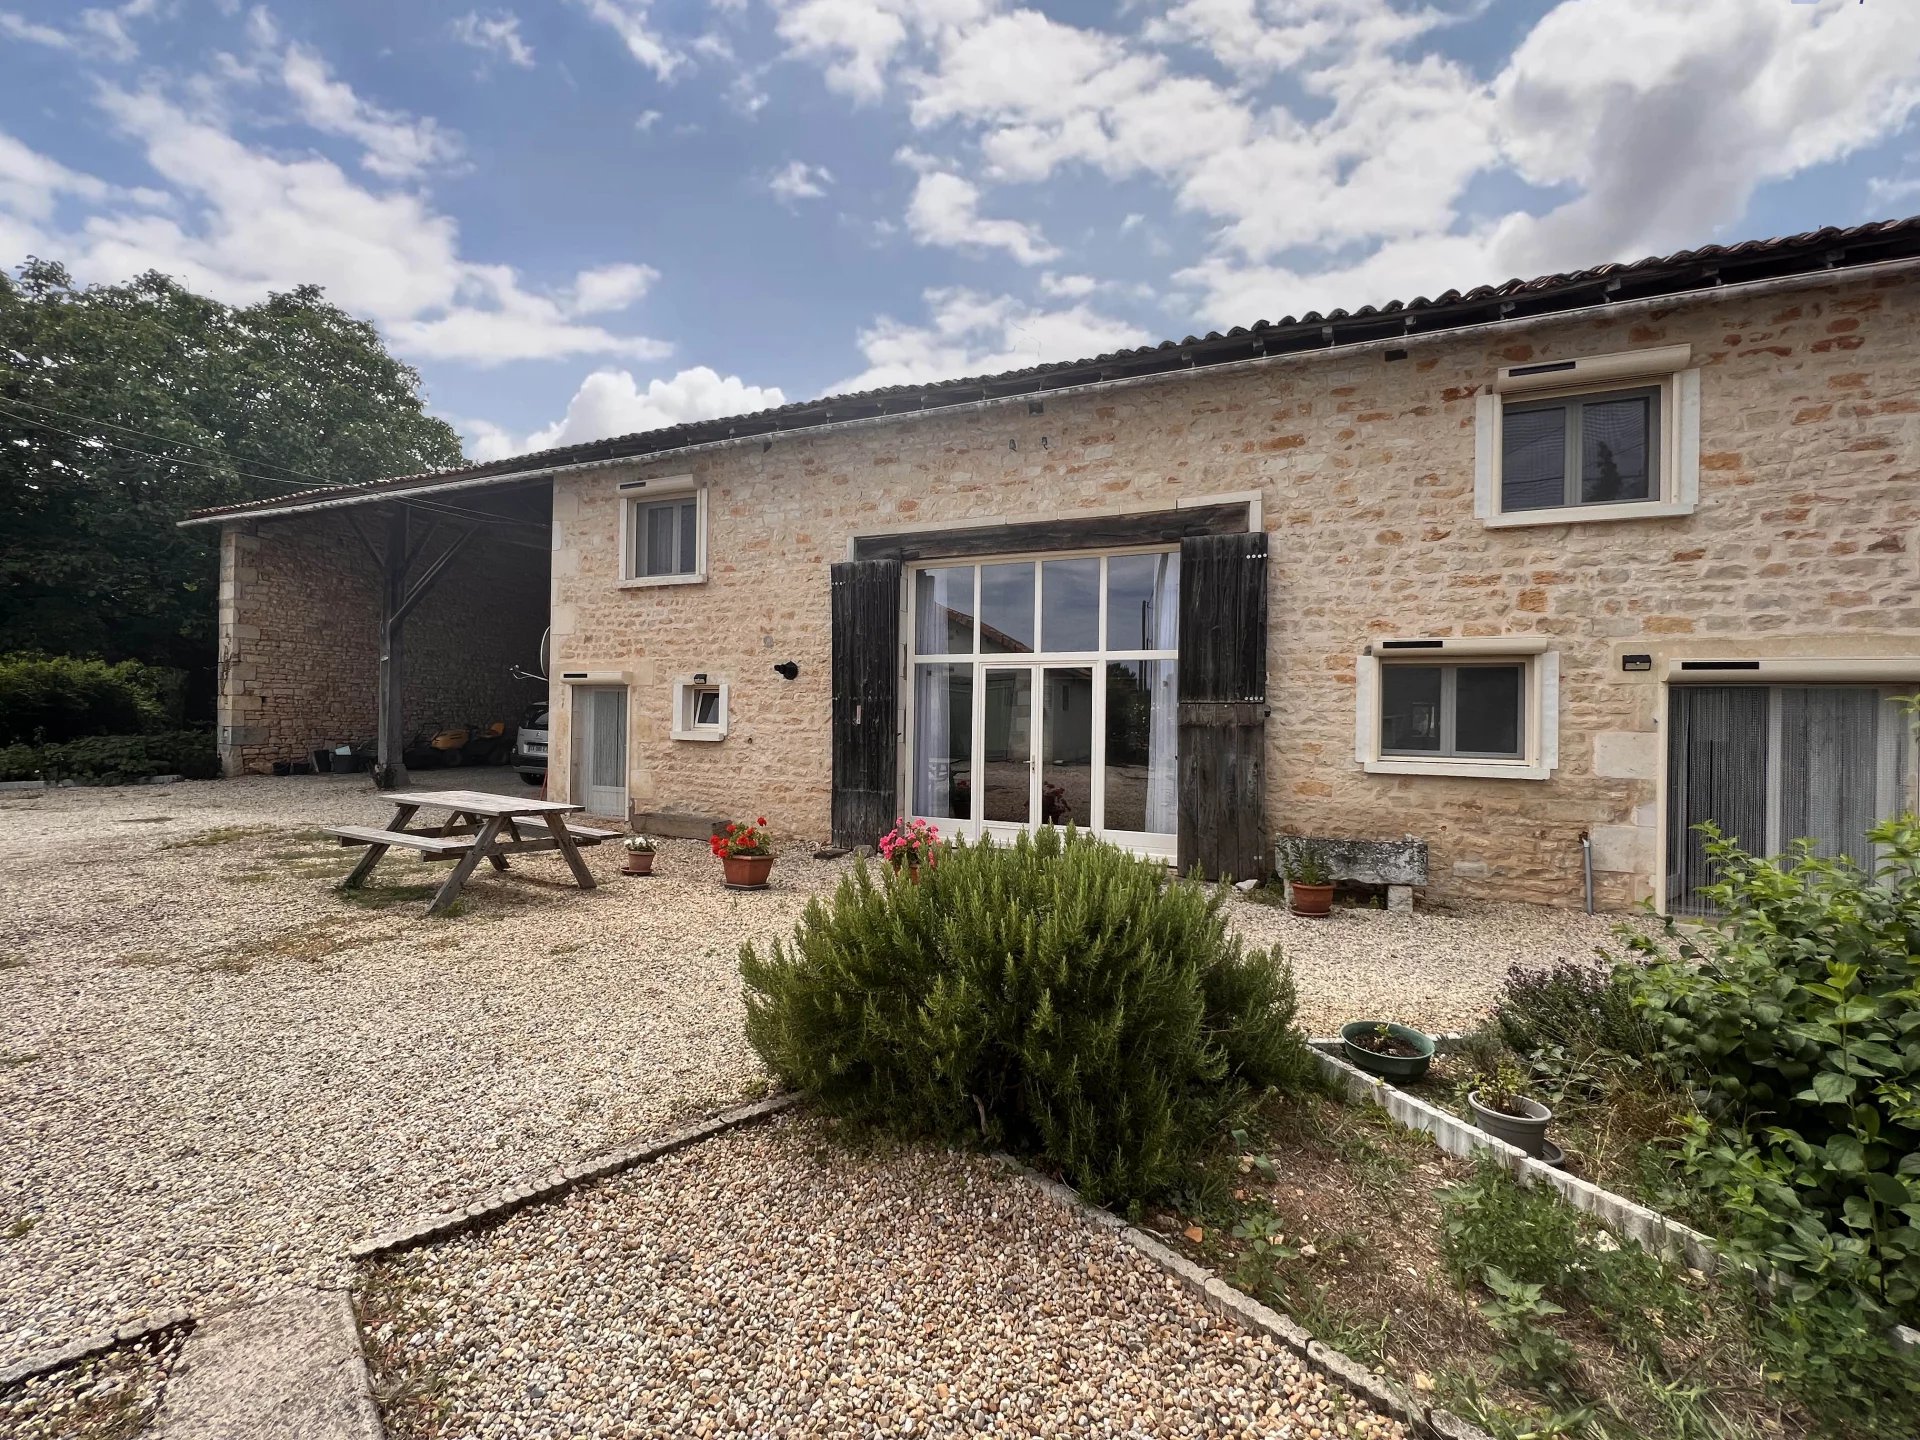 Beautiful 4 bedroom converted barn between the town of Ruffec and Civray